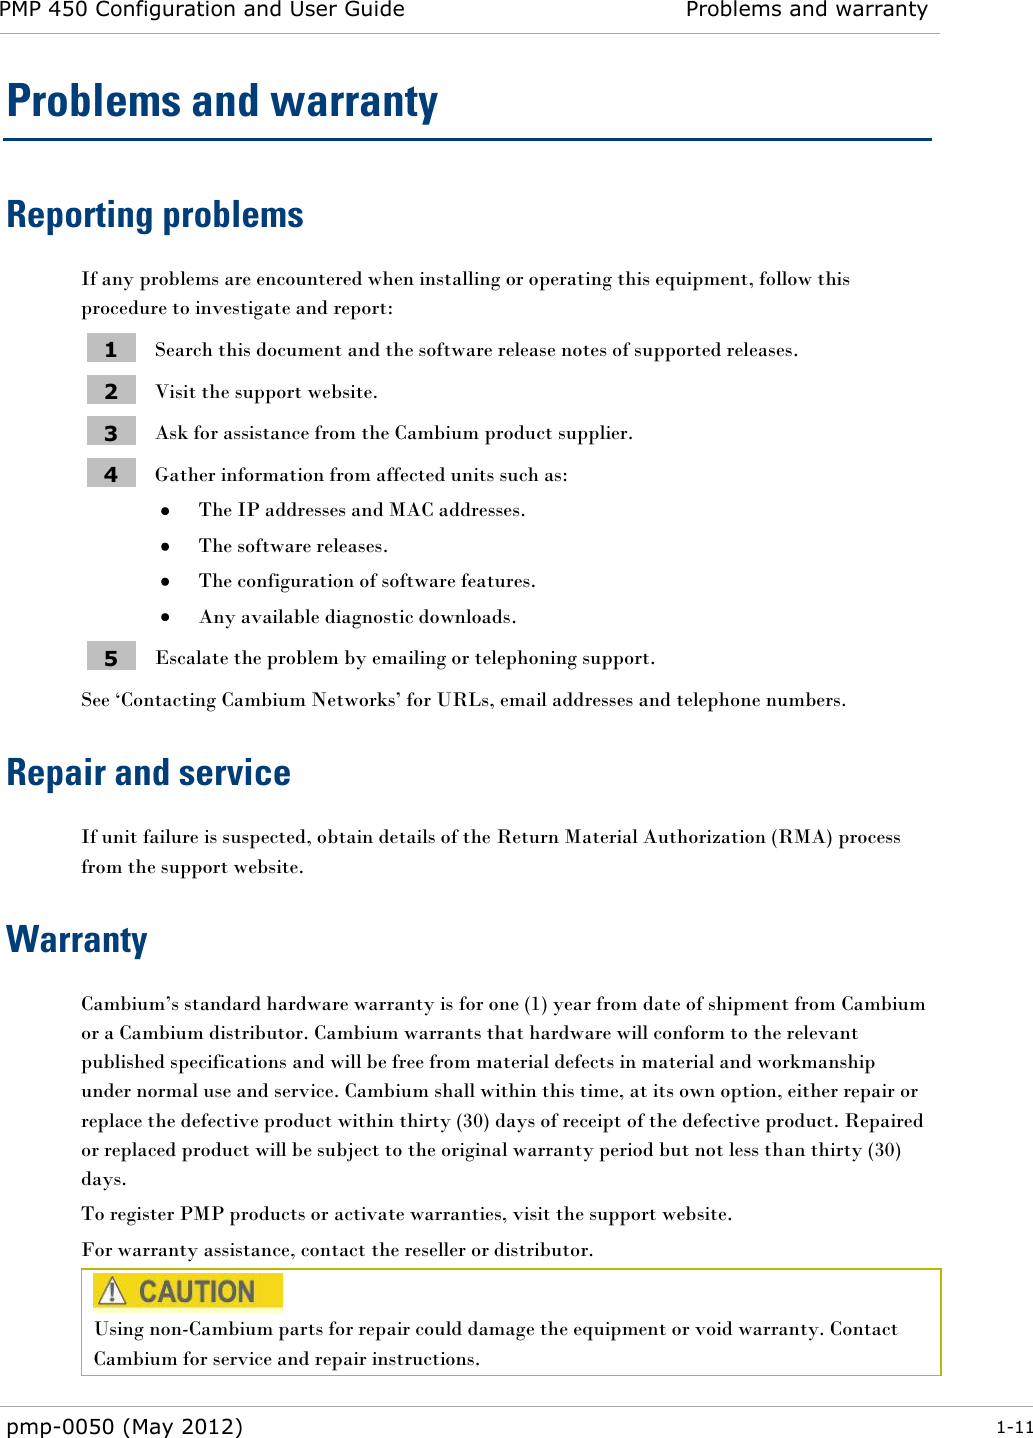 PMP 450 Configuration and User Guide Problems and warranty  pmp-0050 (May 2012)  1-11  Problems and warranty Reporting problems If any problems are encountered when installing or operating this equipment, follow this procedure to investigate and report: 1 Search this document and the software release notes of supported releases. 2 Visit the support website. 3 Ask for assistance from the Cambium product supplier. 4 Gather information from affected units such as:  The IP addresses and MAC addresses.  The software releases.  The configuration of software features.  Any available diagnostic downloads. 5 Escalate the problem by emailing or telephoning support. See ‗Contacting Cambium Networks‘ for URLs, email addresses and telephone numbers. Repair and service If unit failure is suspected, obtain details of the Return Material Authorization (RMA) process from the support website. Warranty Cambium‘s standard hardware warranty is for one (1) year from date of shipment from Cambium or a Cambium distributor. Cambium warrants that hardware will conform to the relevant published specifications and will be free from material defects in material and workmanship under normal use and service. Cambium shall within this time, at its own option, either repair or replace the defective product within thirty (30) days of receipt of the defective product. Repaired or replaced product will be subject to the original warranty period but not less than thirty (30) days. To register PMP products or activate warranties, visit the support website. For warranty assistance, contact the reseller or distributor.  Using non-Cambium parts for repair could damage the equipment or void warranty. Contact Cambium for service and repair instructions.  